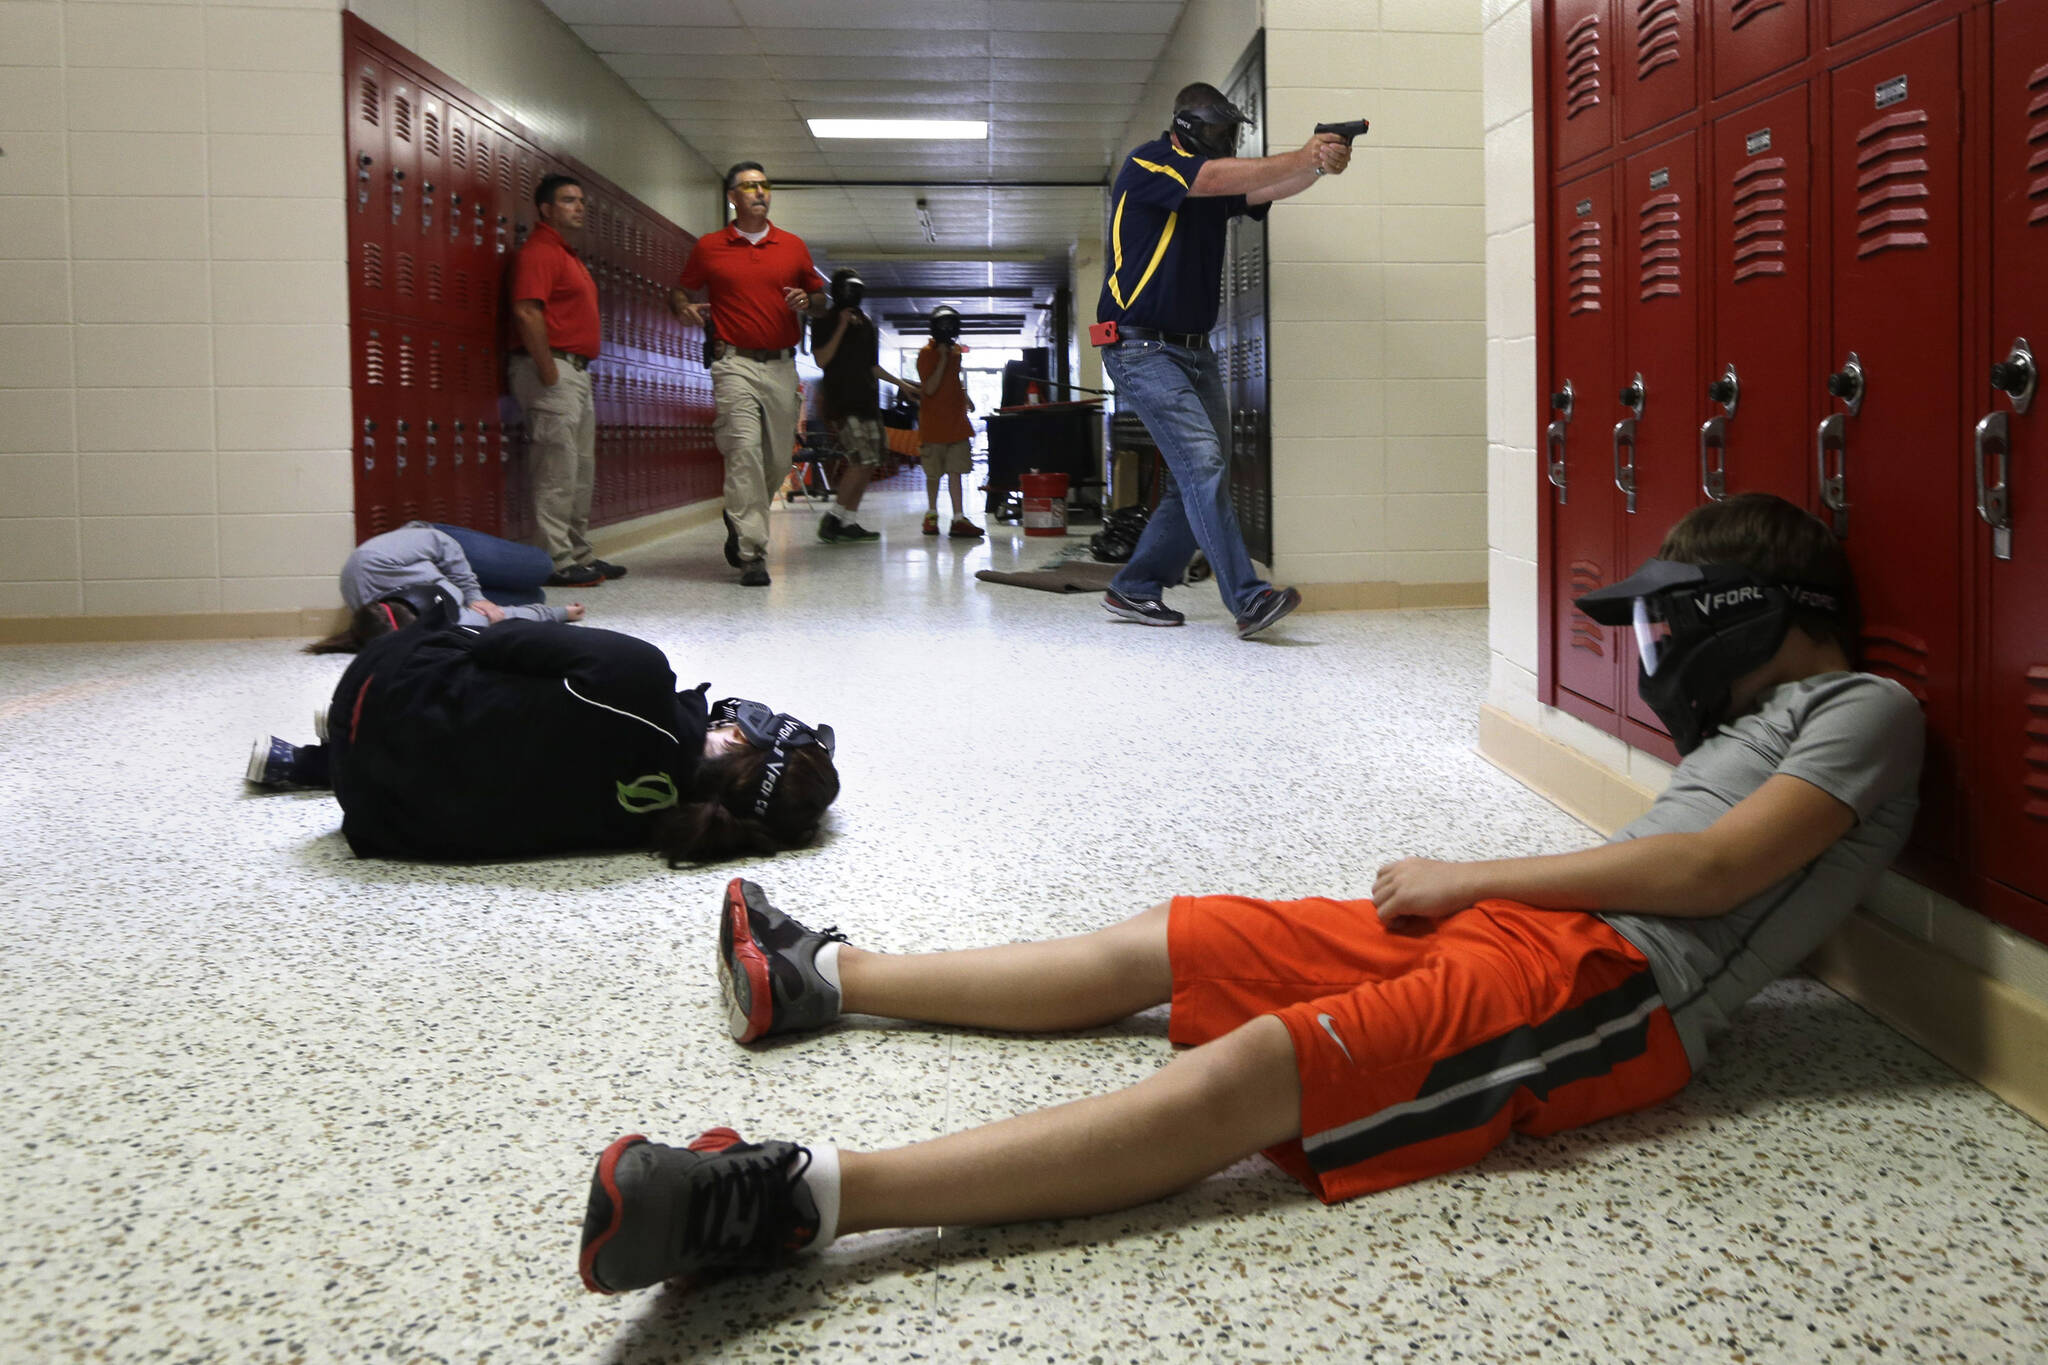 In this file photo taken July 11, 2013, a Clarksville Schools faculty member, top right, carries an air-powered practice handgun to a classroom as firearms instructors, left, watch and students, lying on the floor, portray victims during a training exercise in Clarksville, Ark. (AP Photo/Danny Johnston, File)